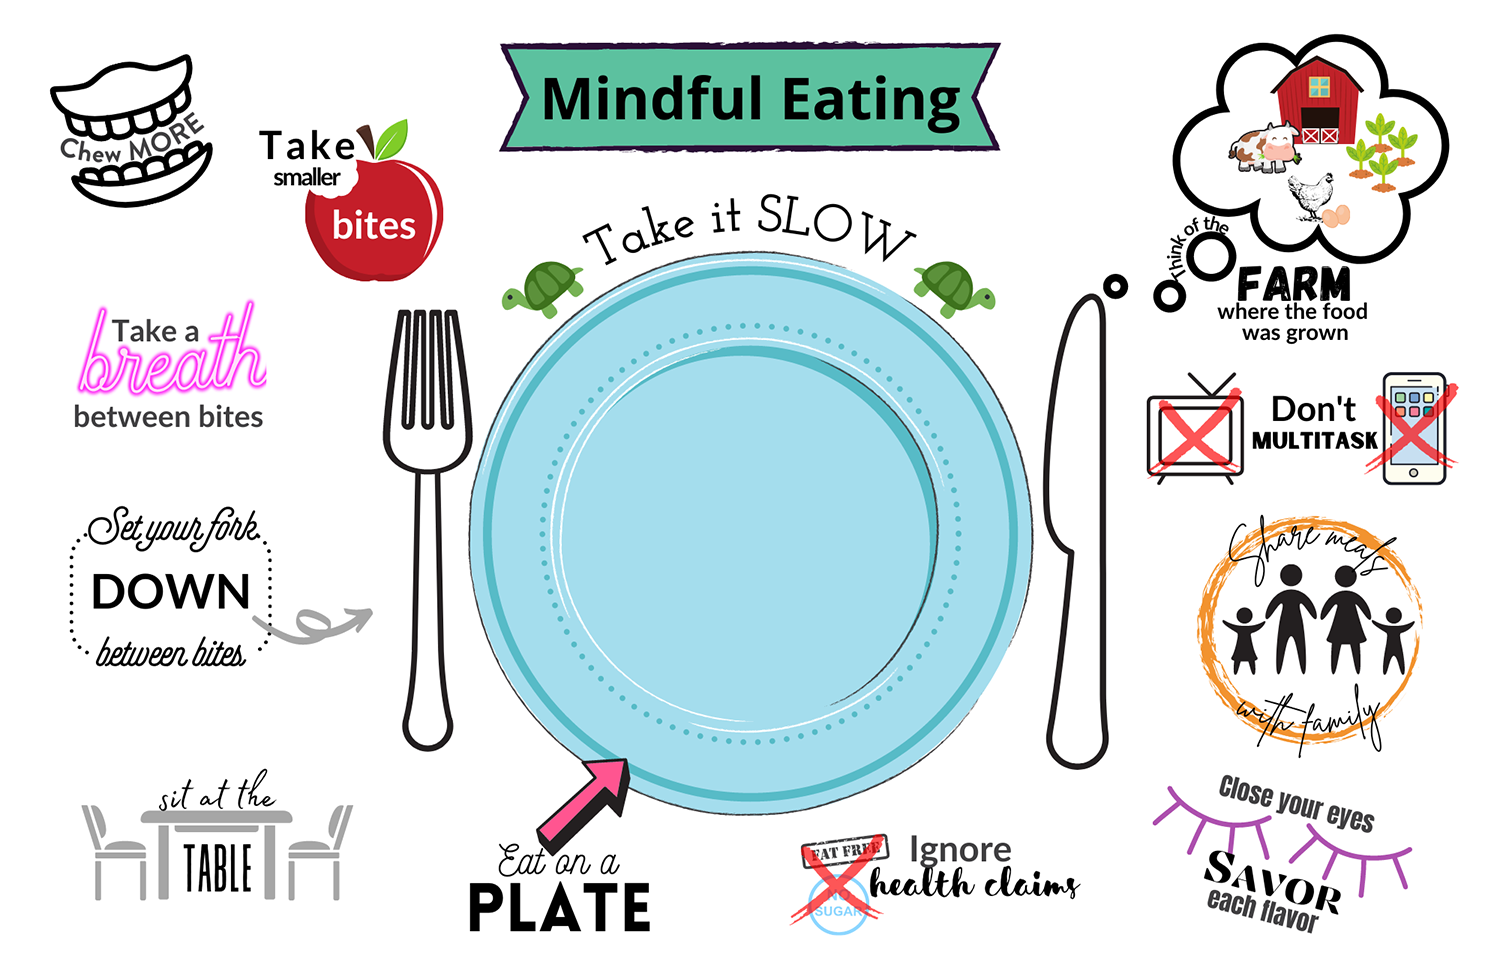 Mindful eating and mindful meal planning